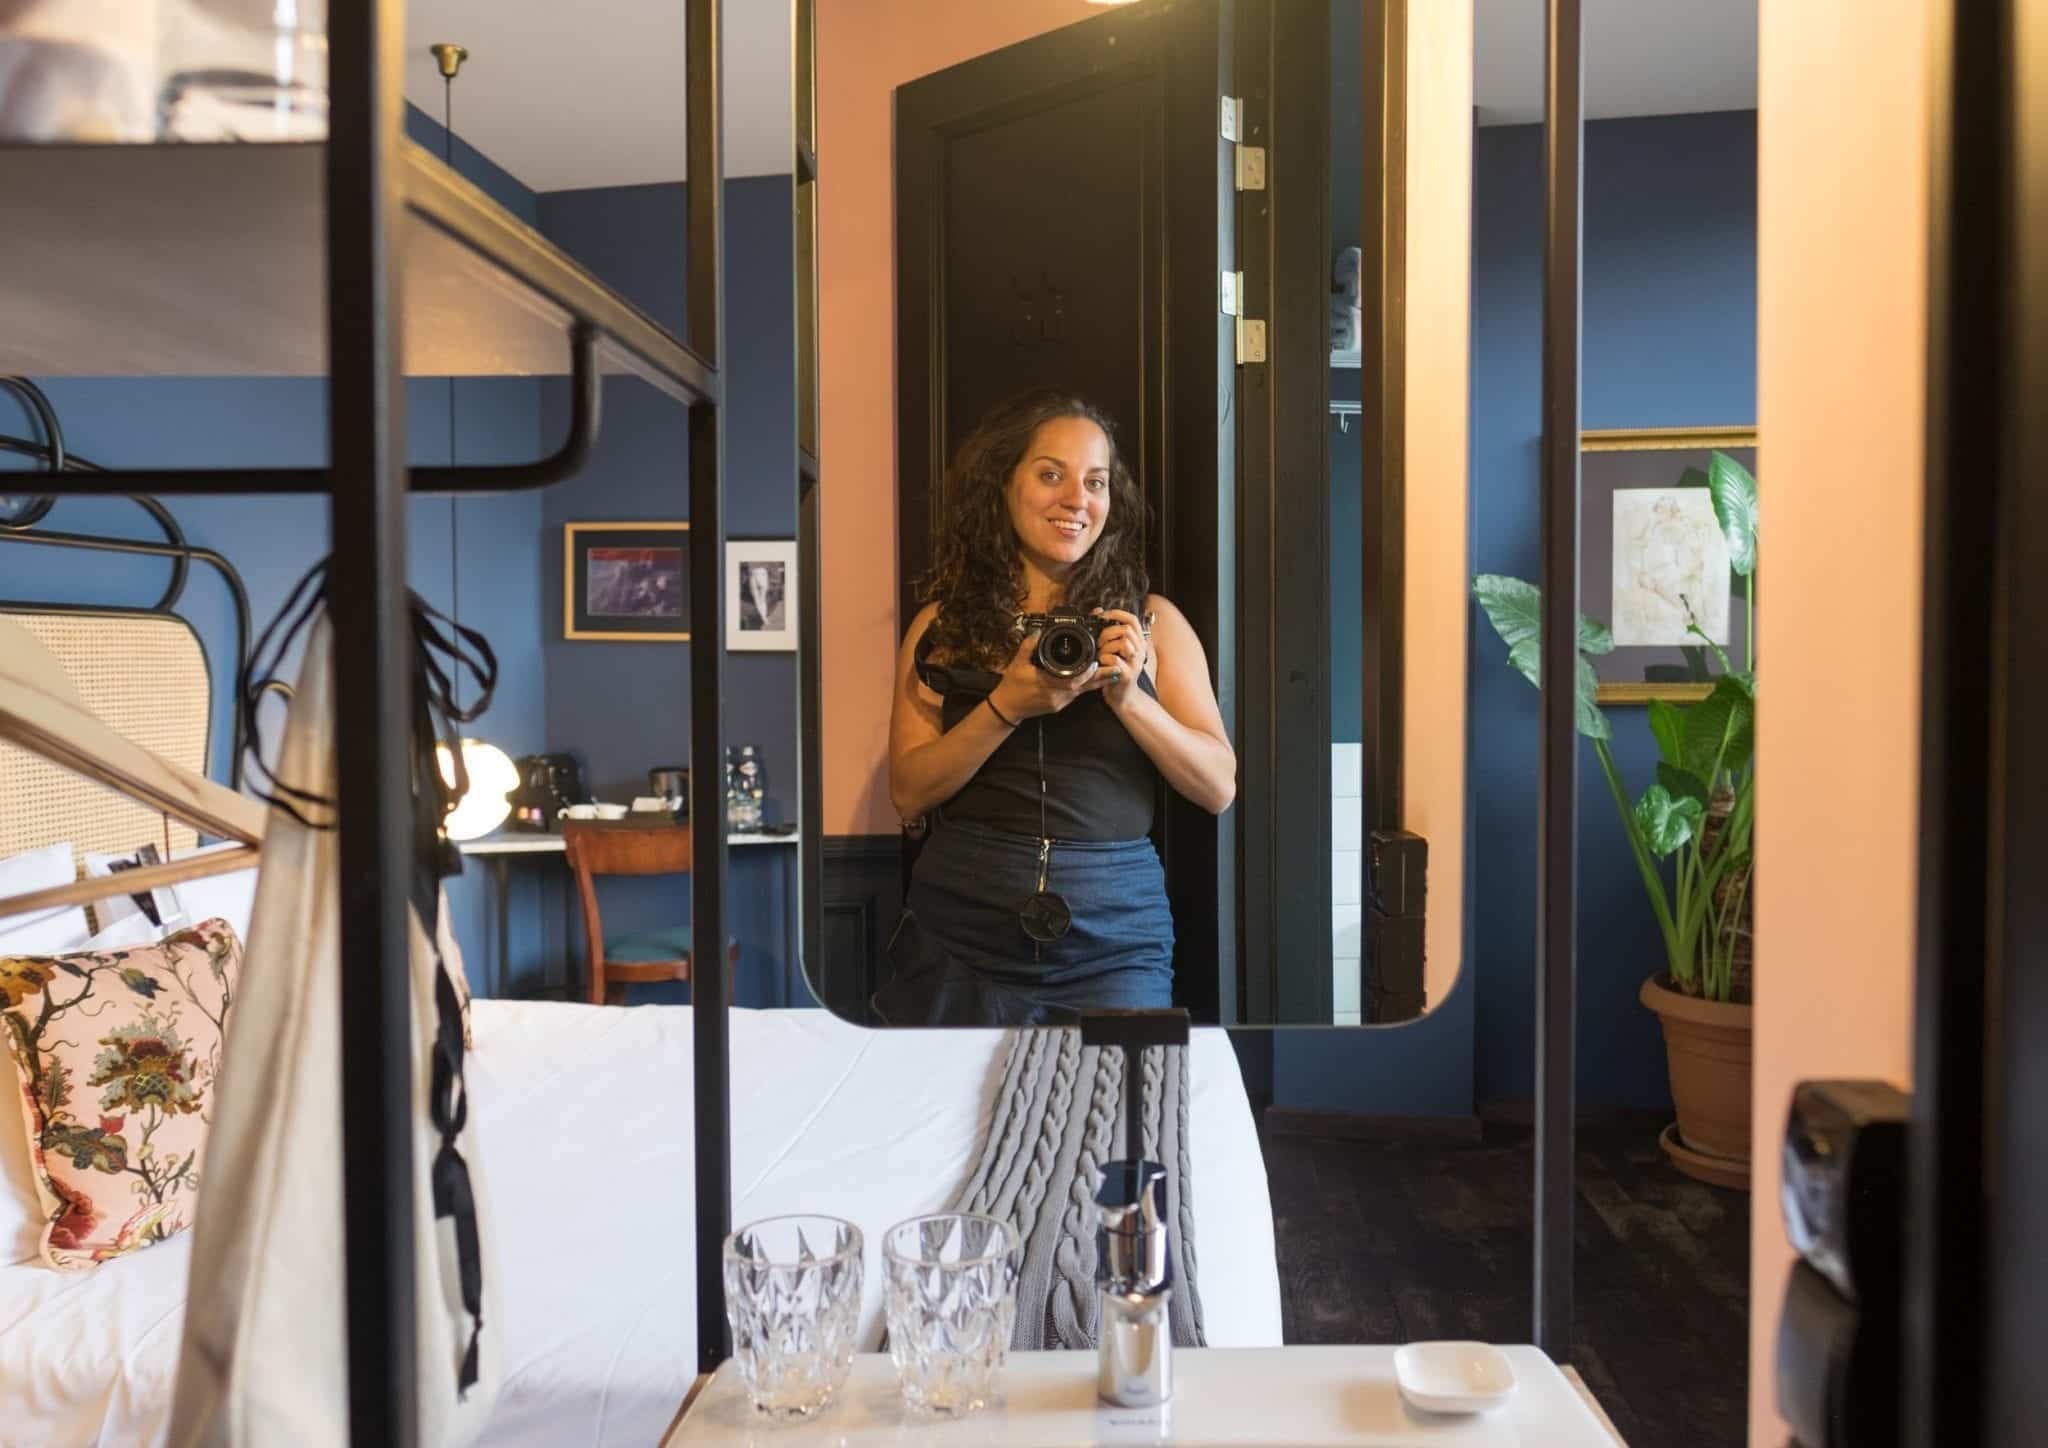 Kate takes a photo in a small mirror above a tiny modern sink; in the background you can see a modern hotel room painted dark blue.